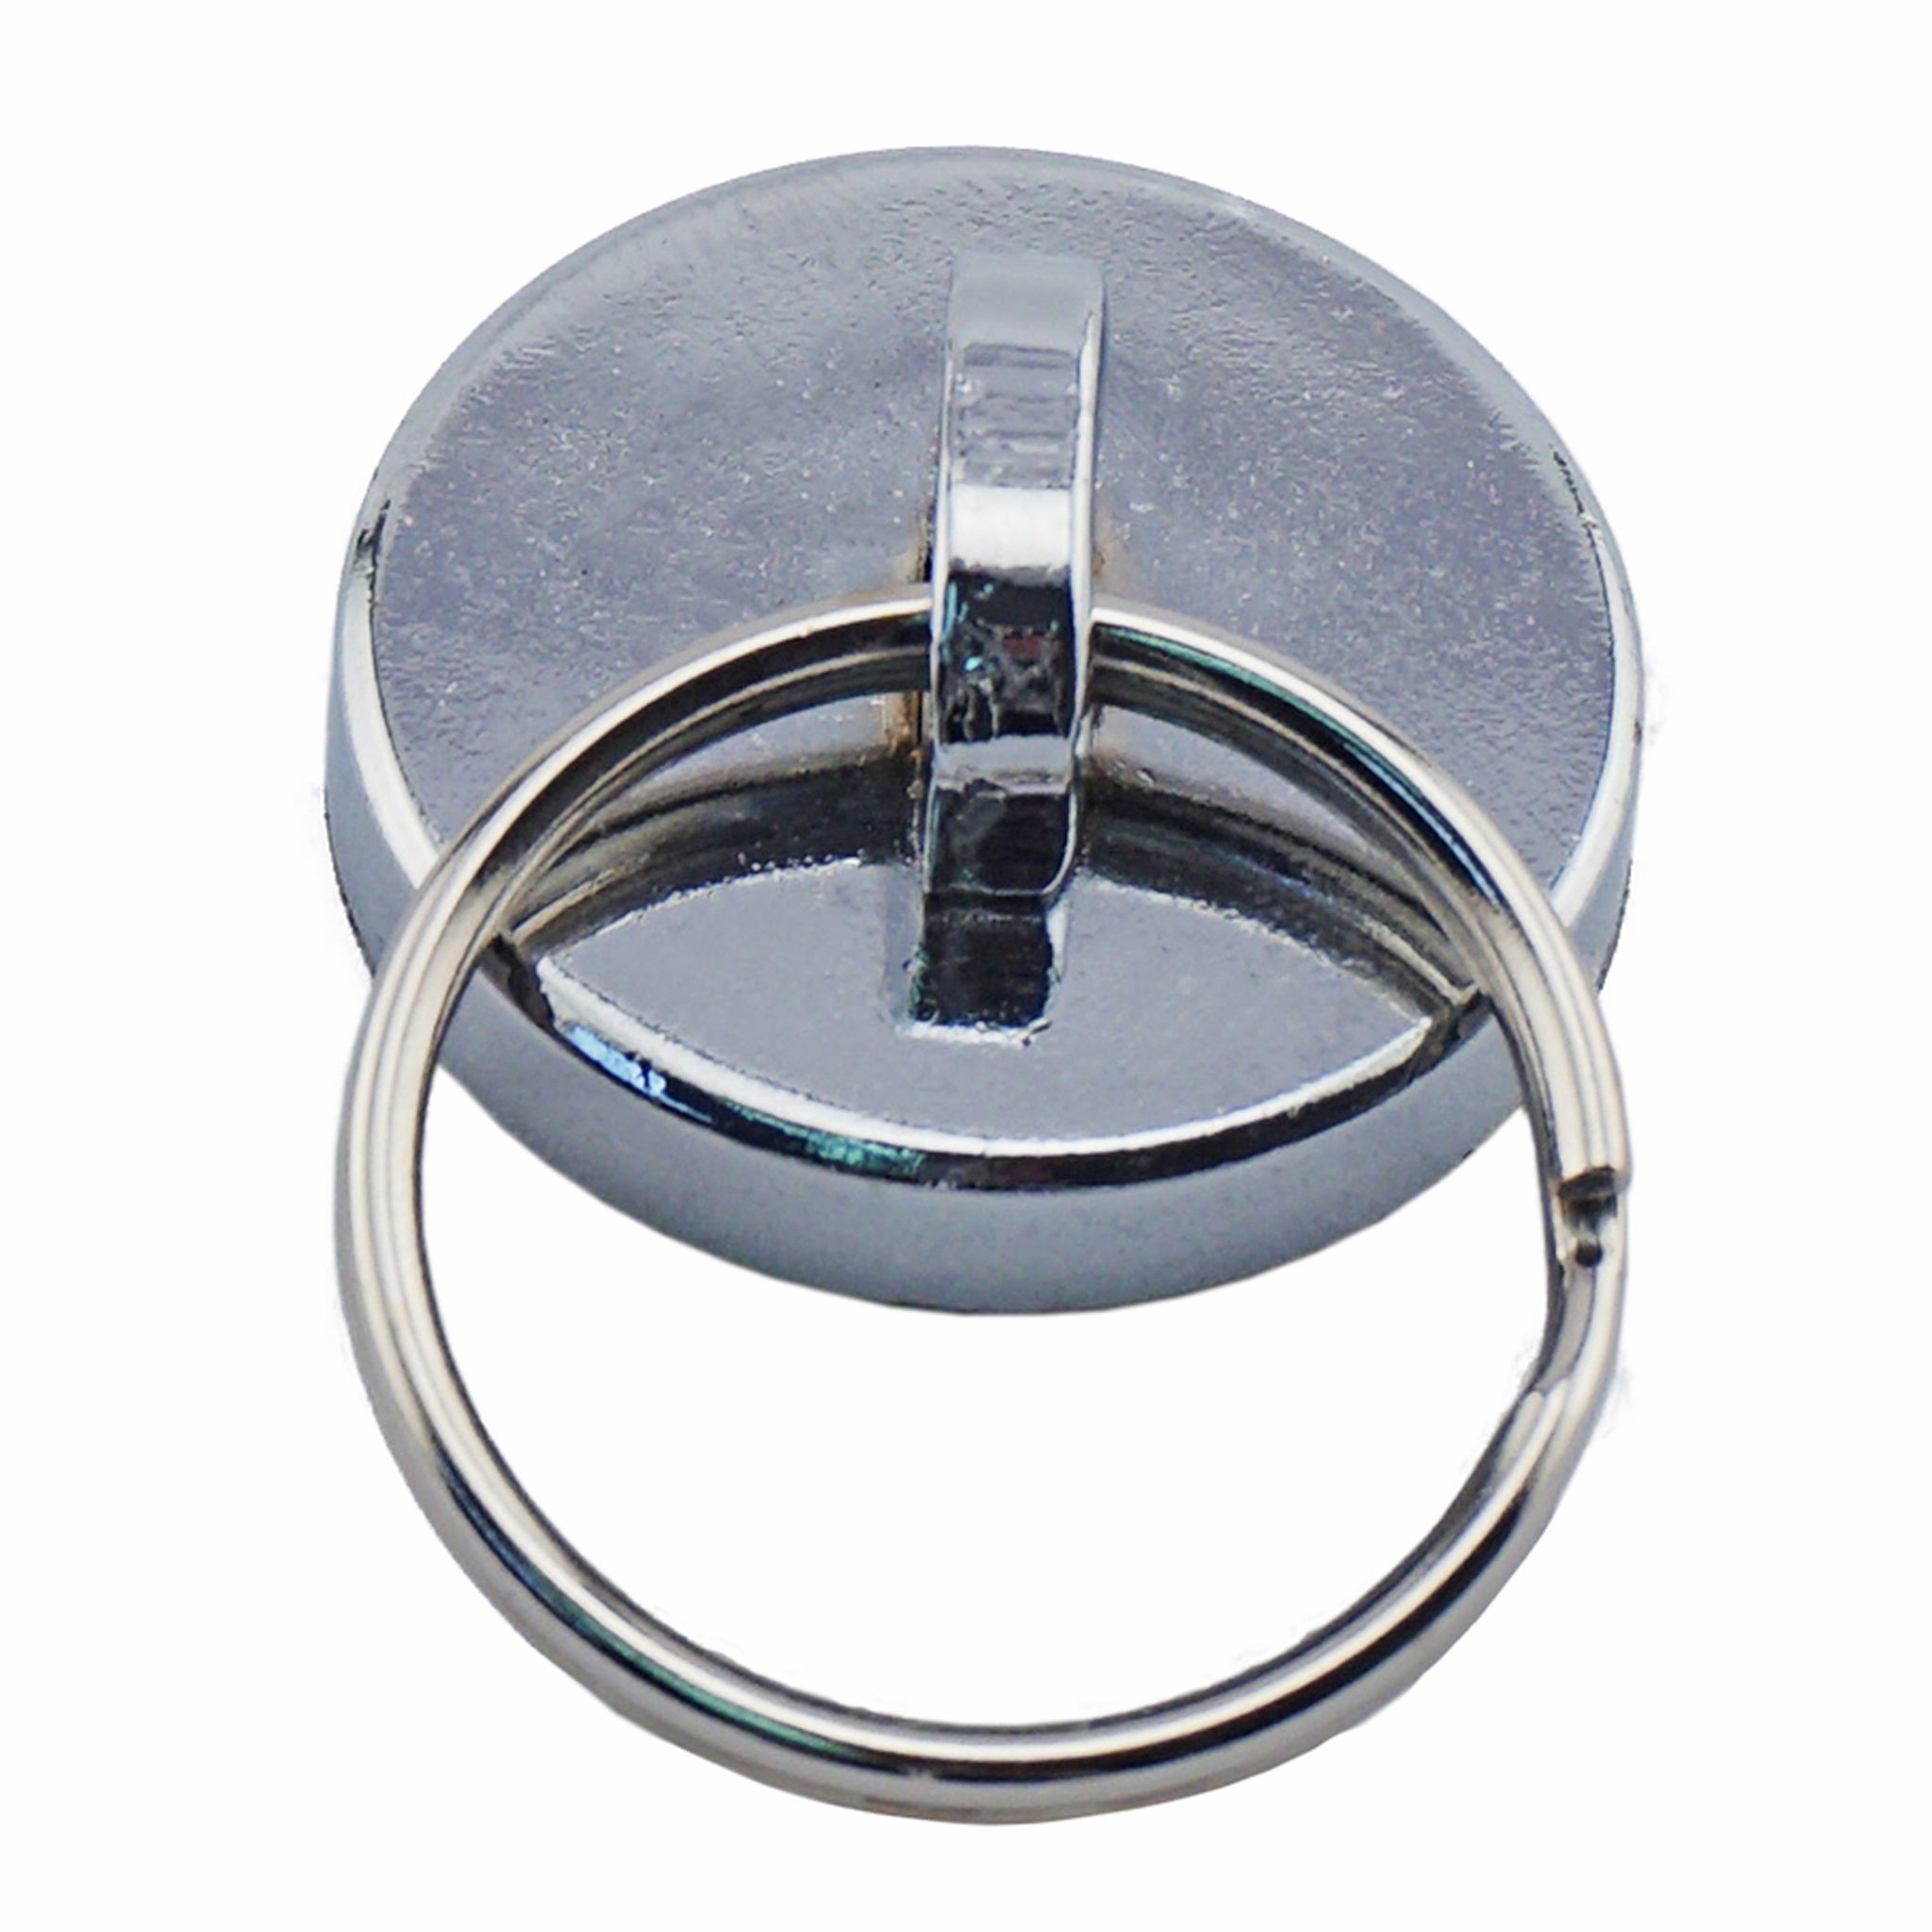 POWERFUL MAGNETIC KEYCHAIN Super Strong Magnet Split Rings